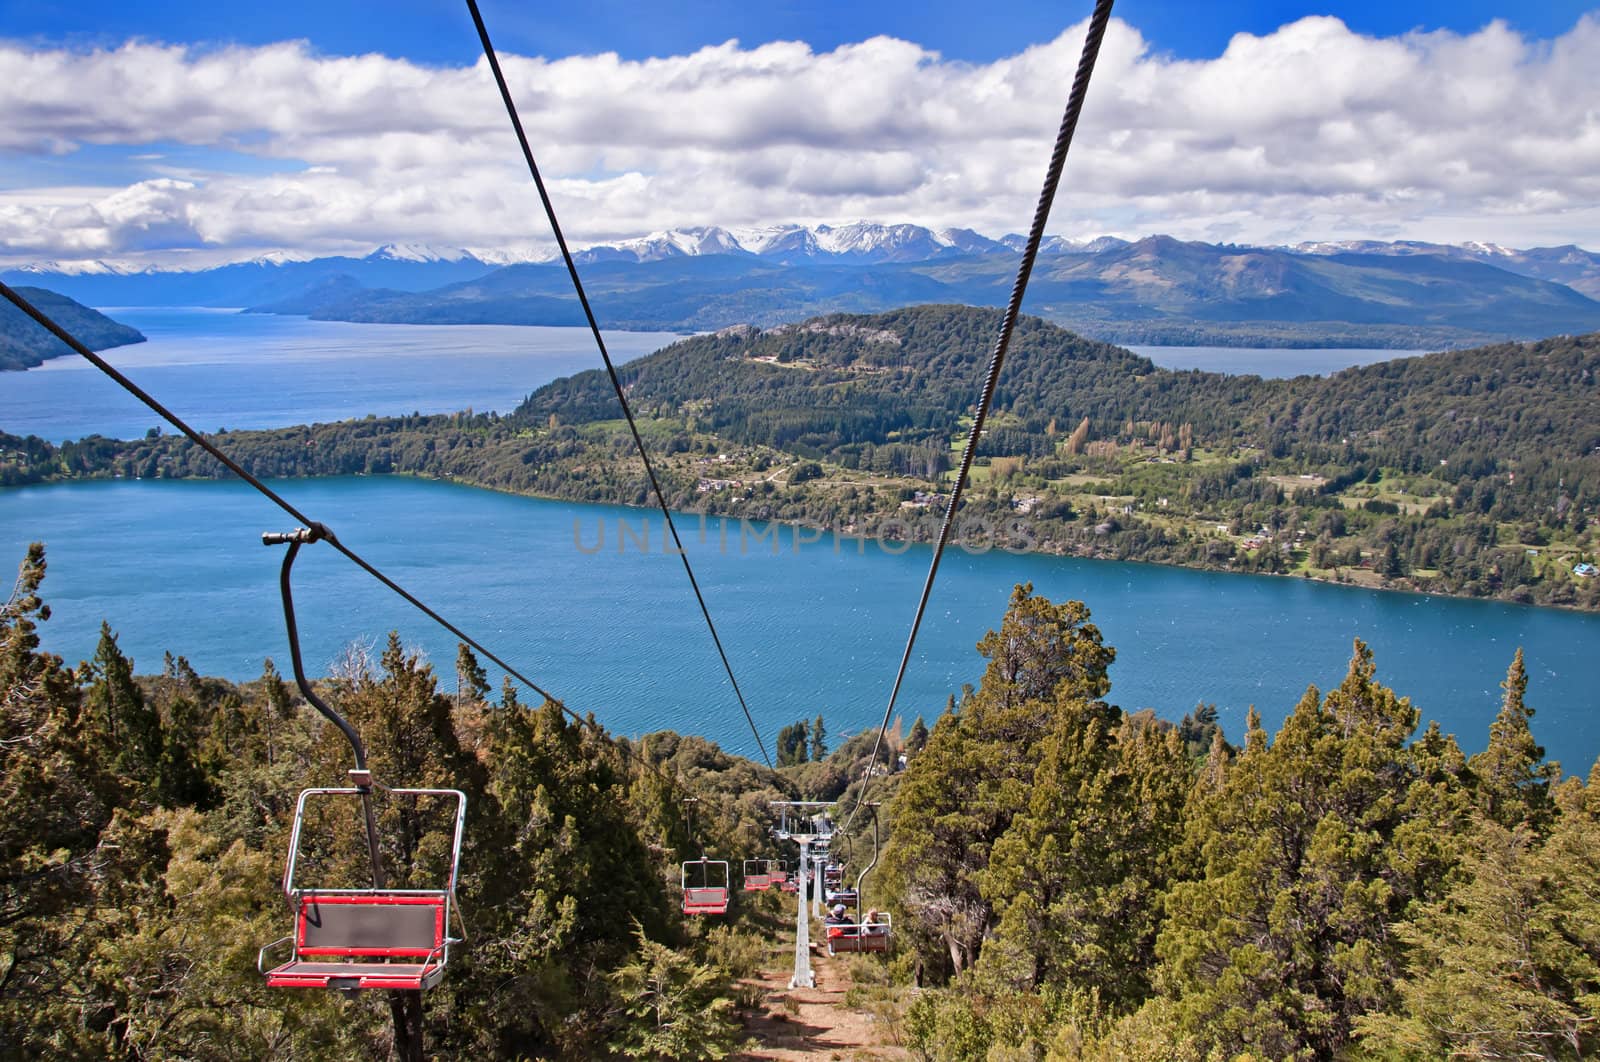 Cable car ride down the mountain in Baroiloche, Argentina